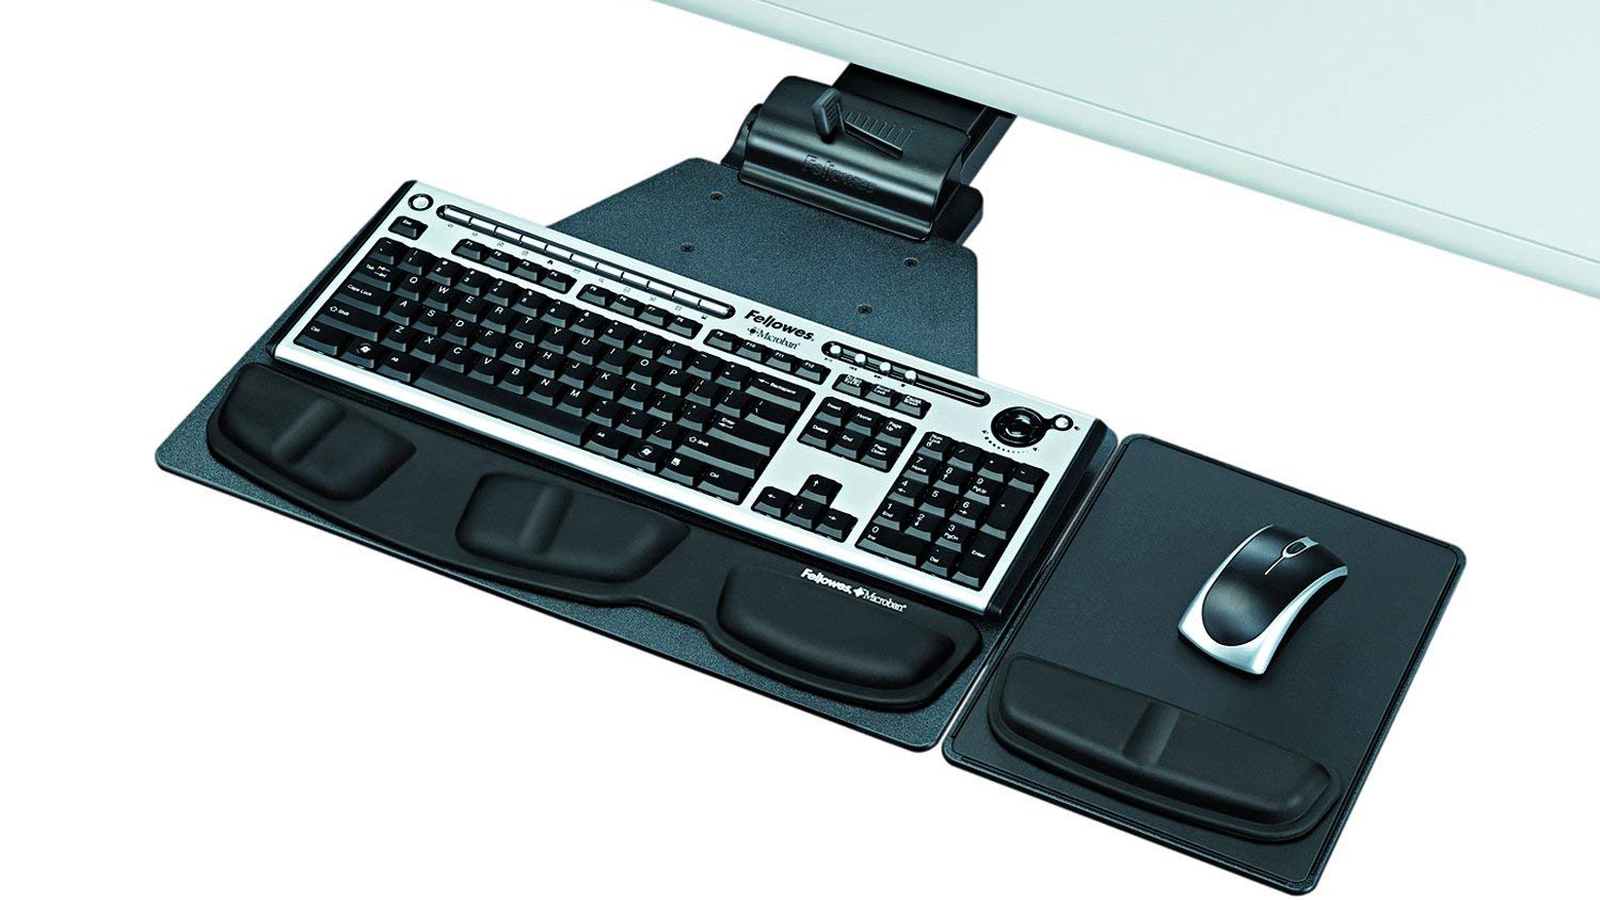 15 Best Keyboard Tray for Gaming. How To Choose The Right One?